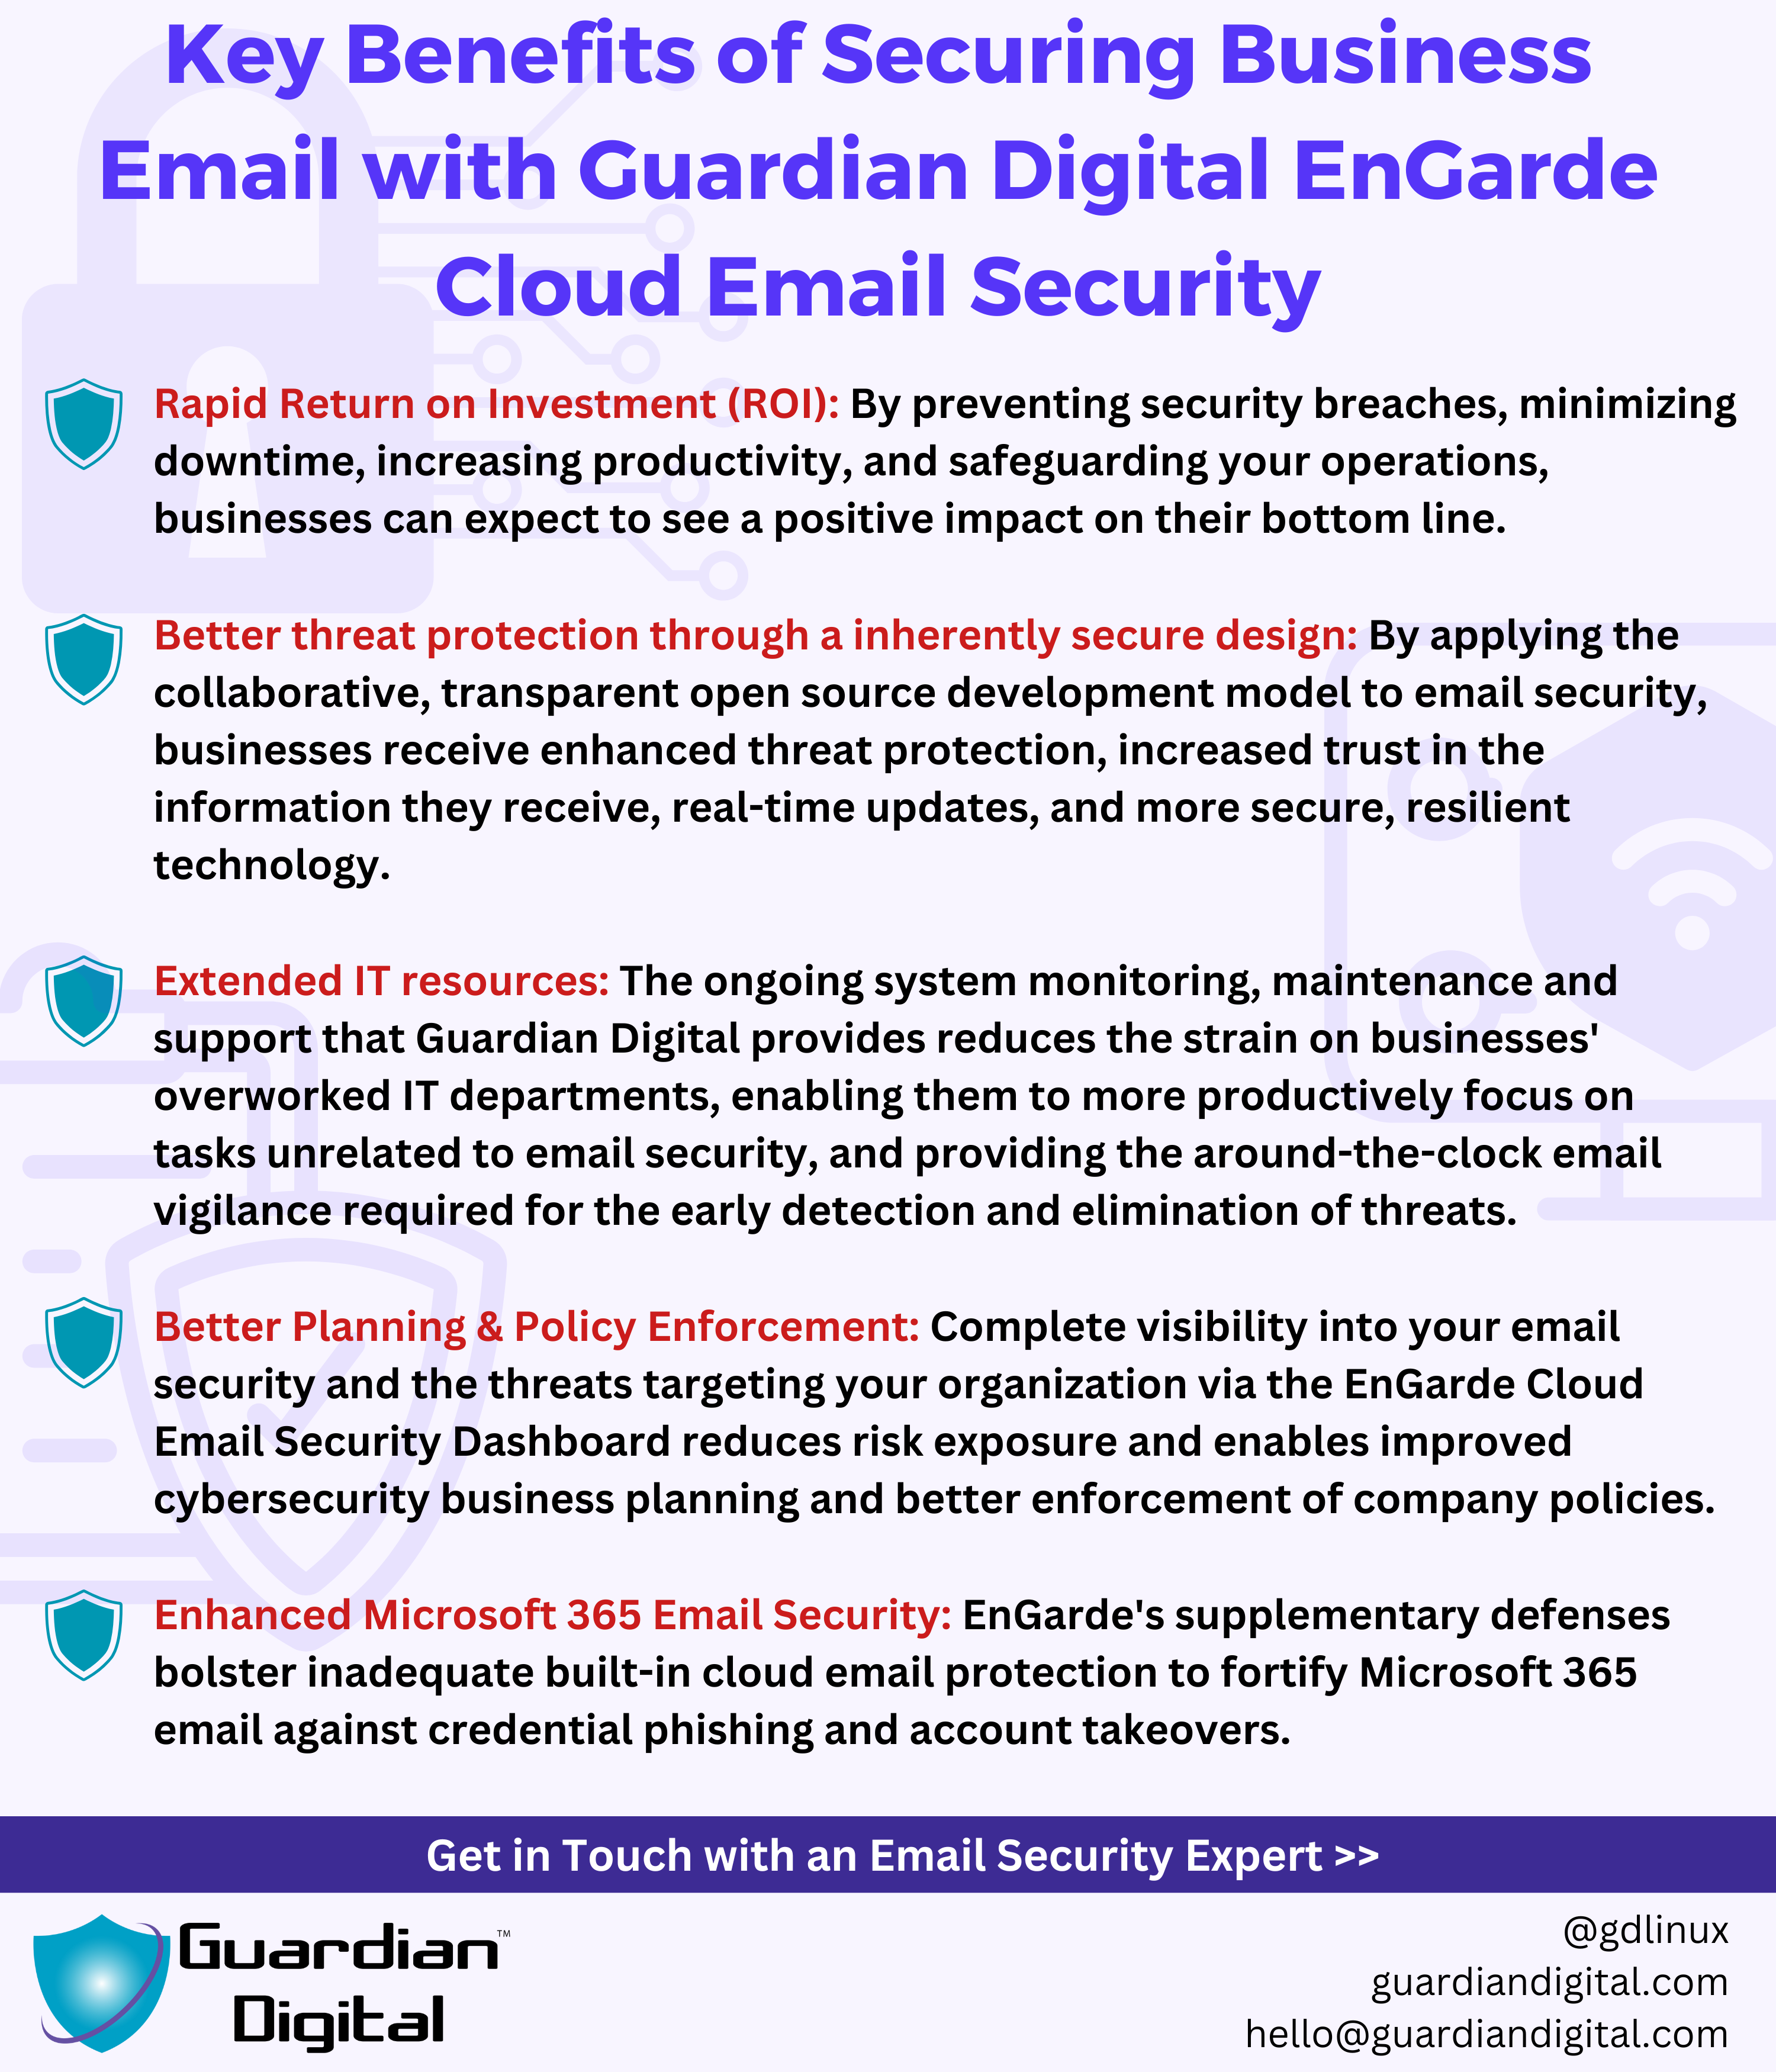 Key Benefits of Securing Business Email with Guardian Digital EnGarde Cloud Email Security